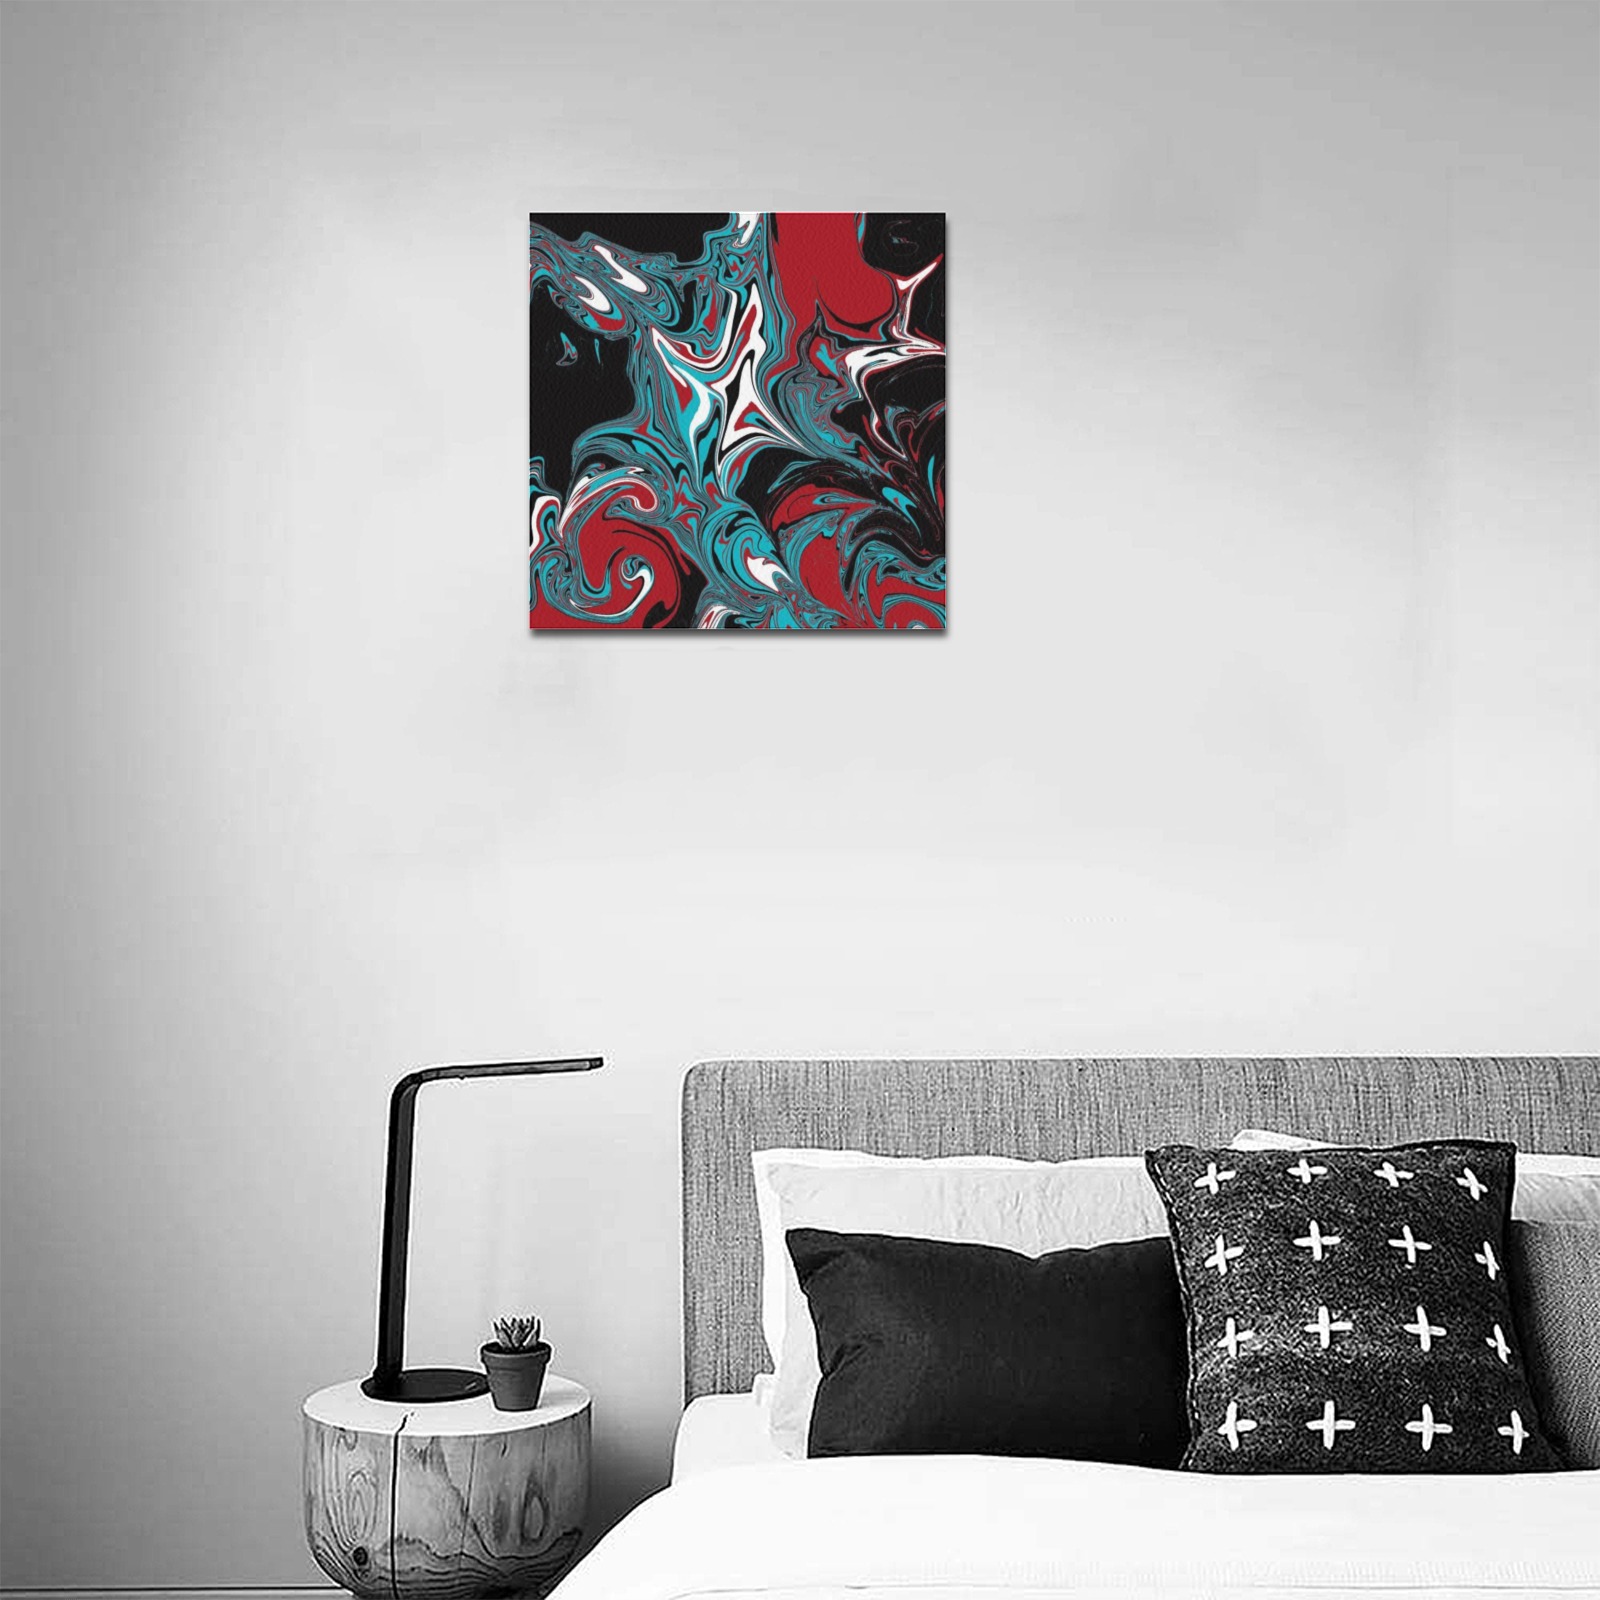 Dark Wave of Colors Upgraded Canvas Print 16"x16"